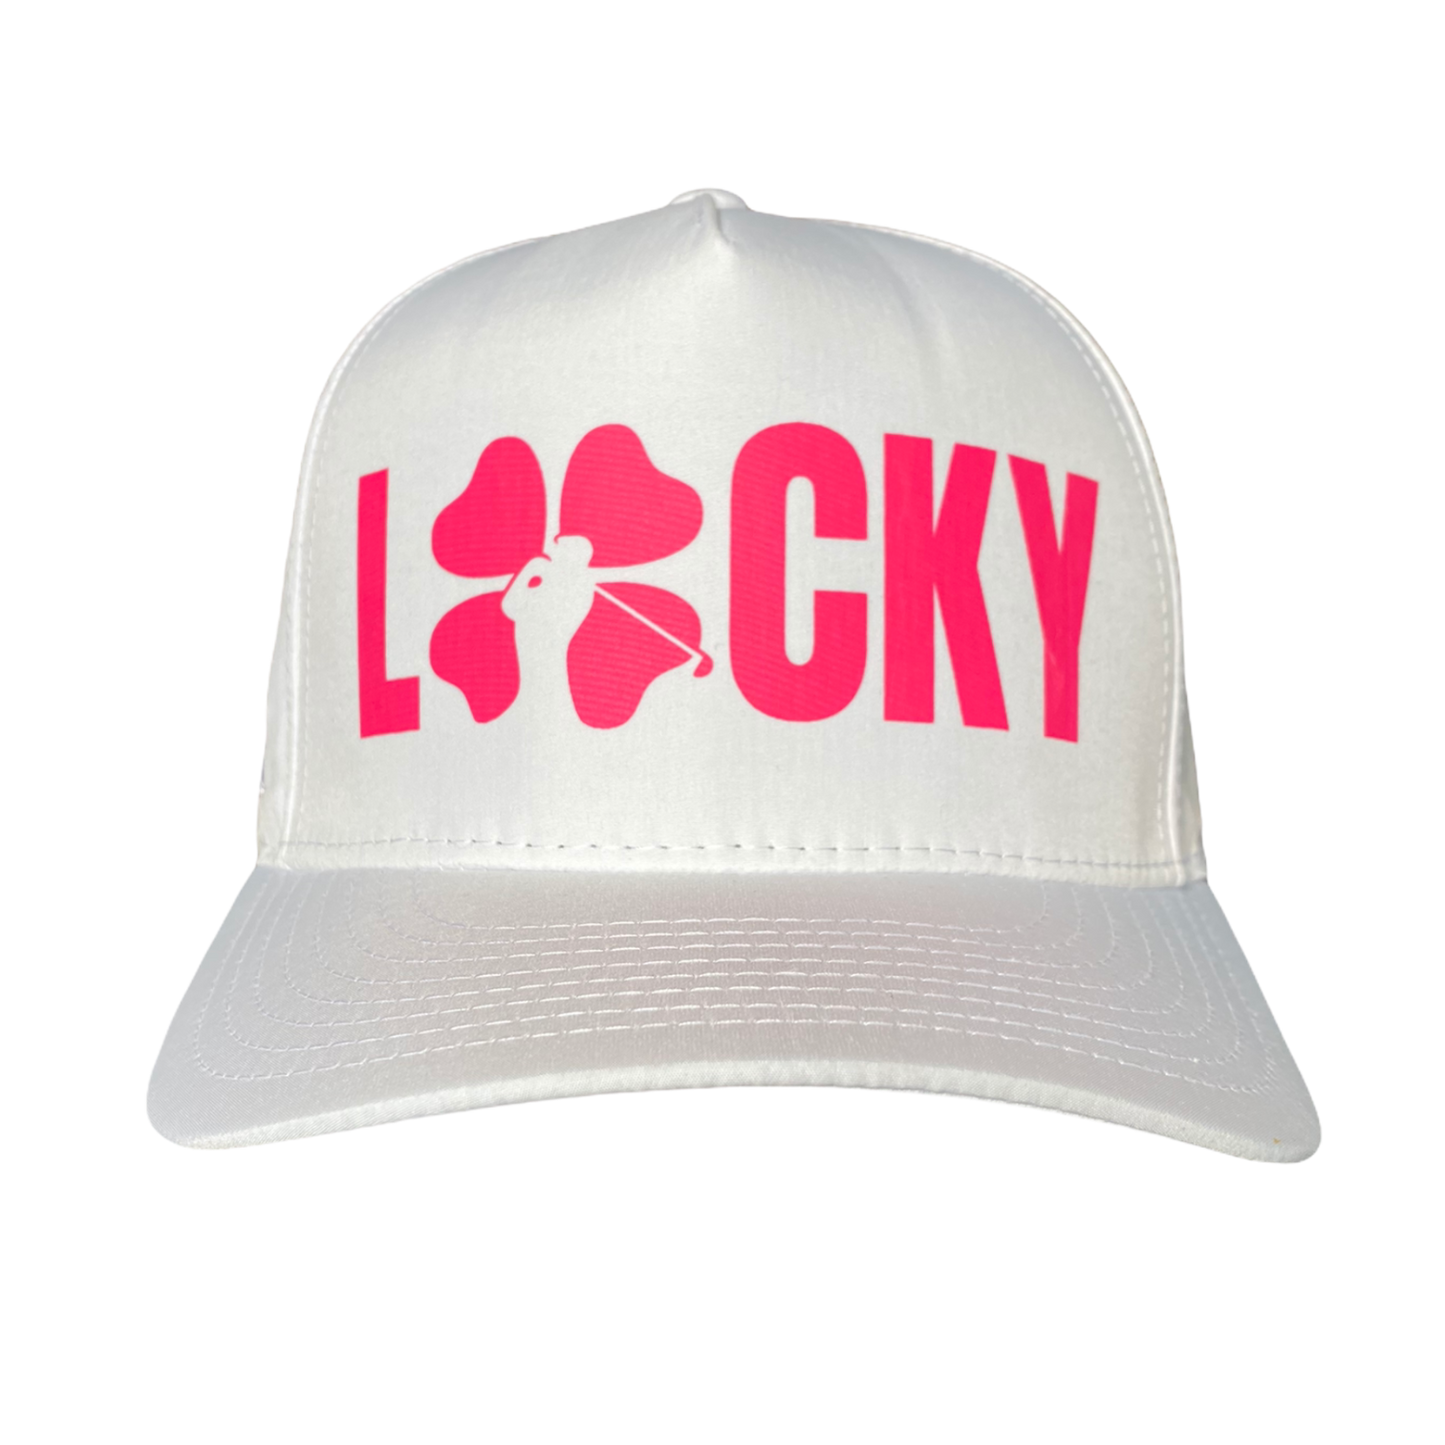 Pink "LUCKY" Hat